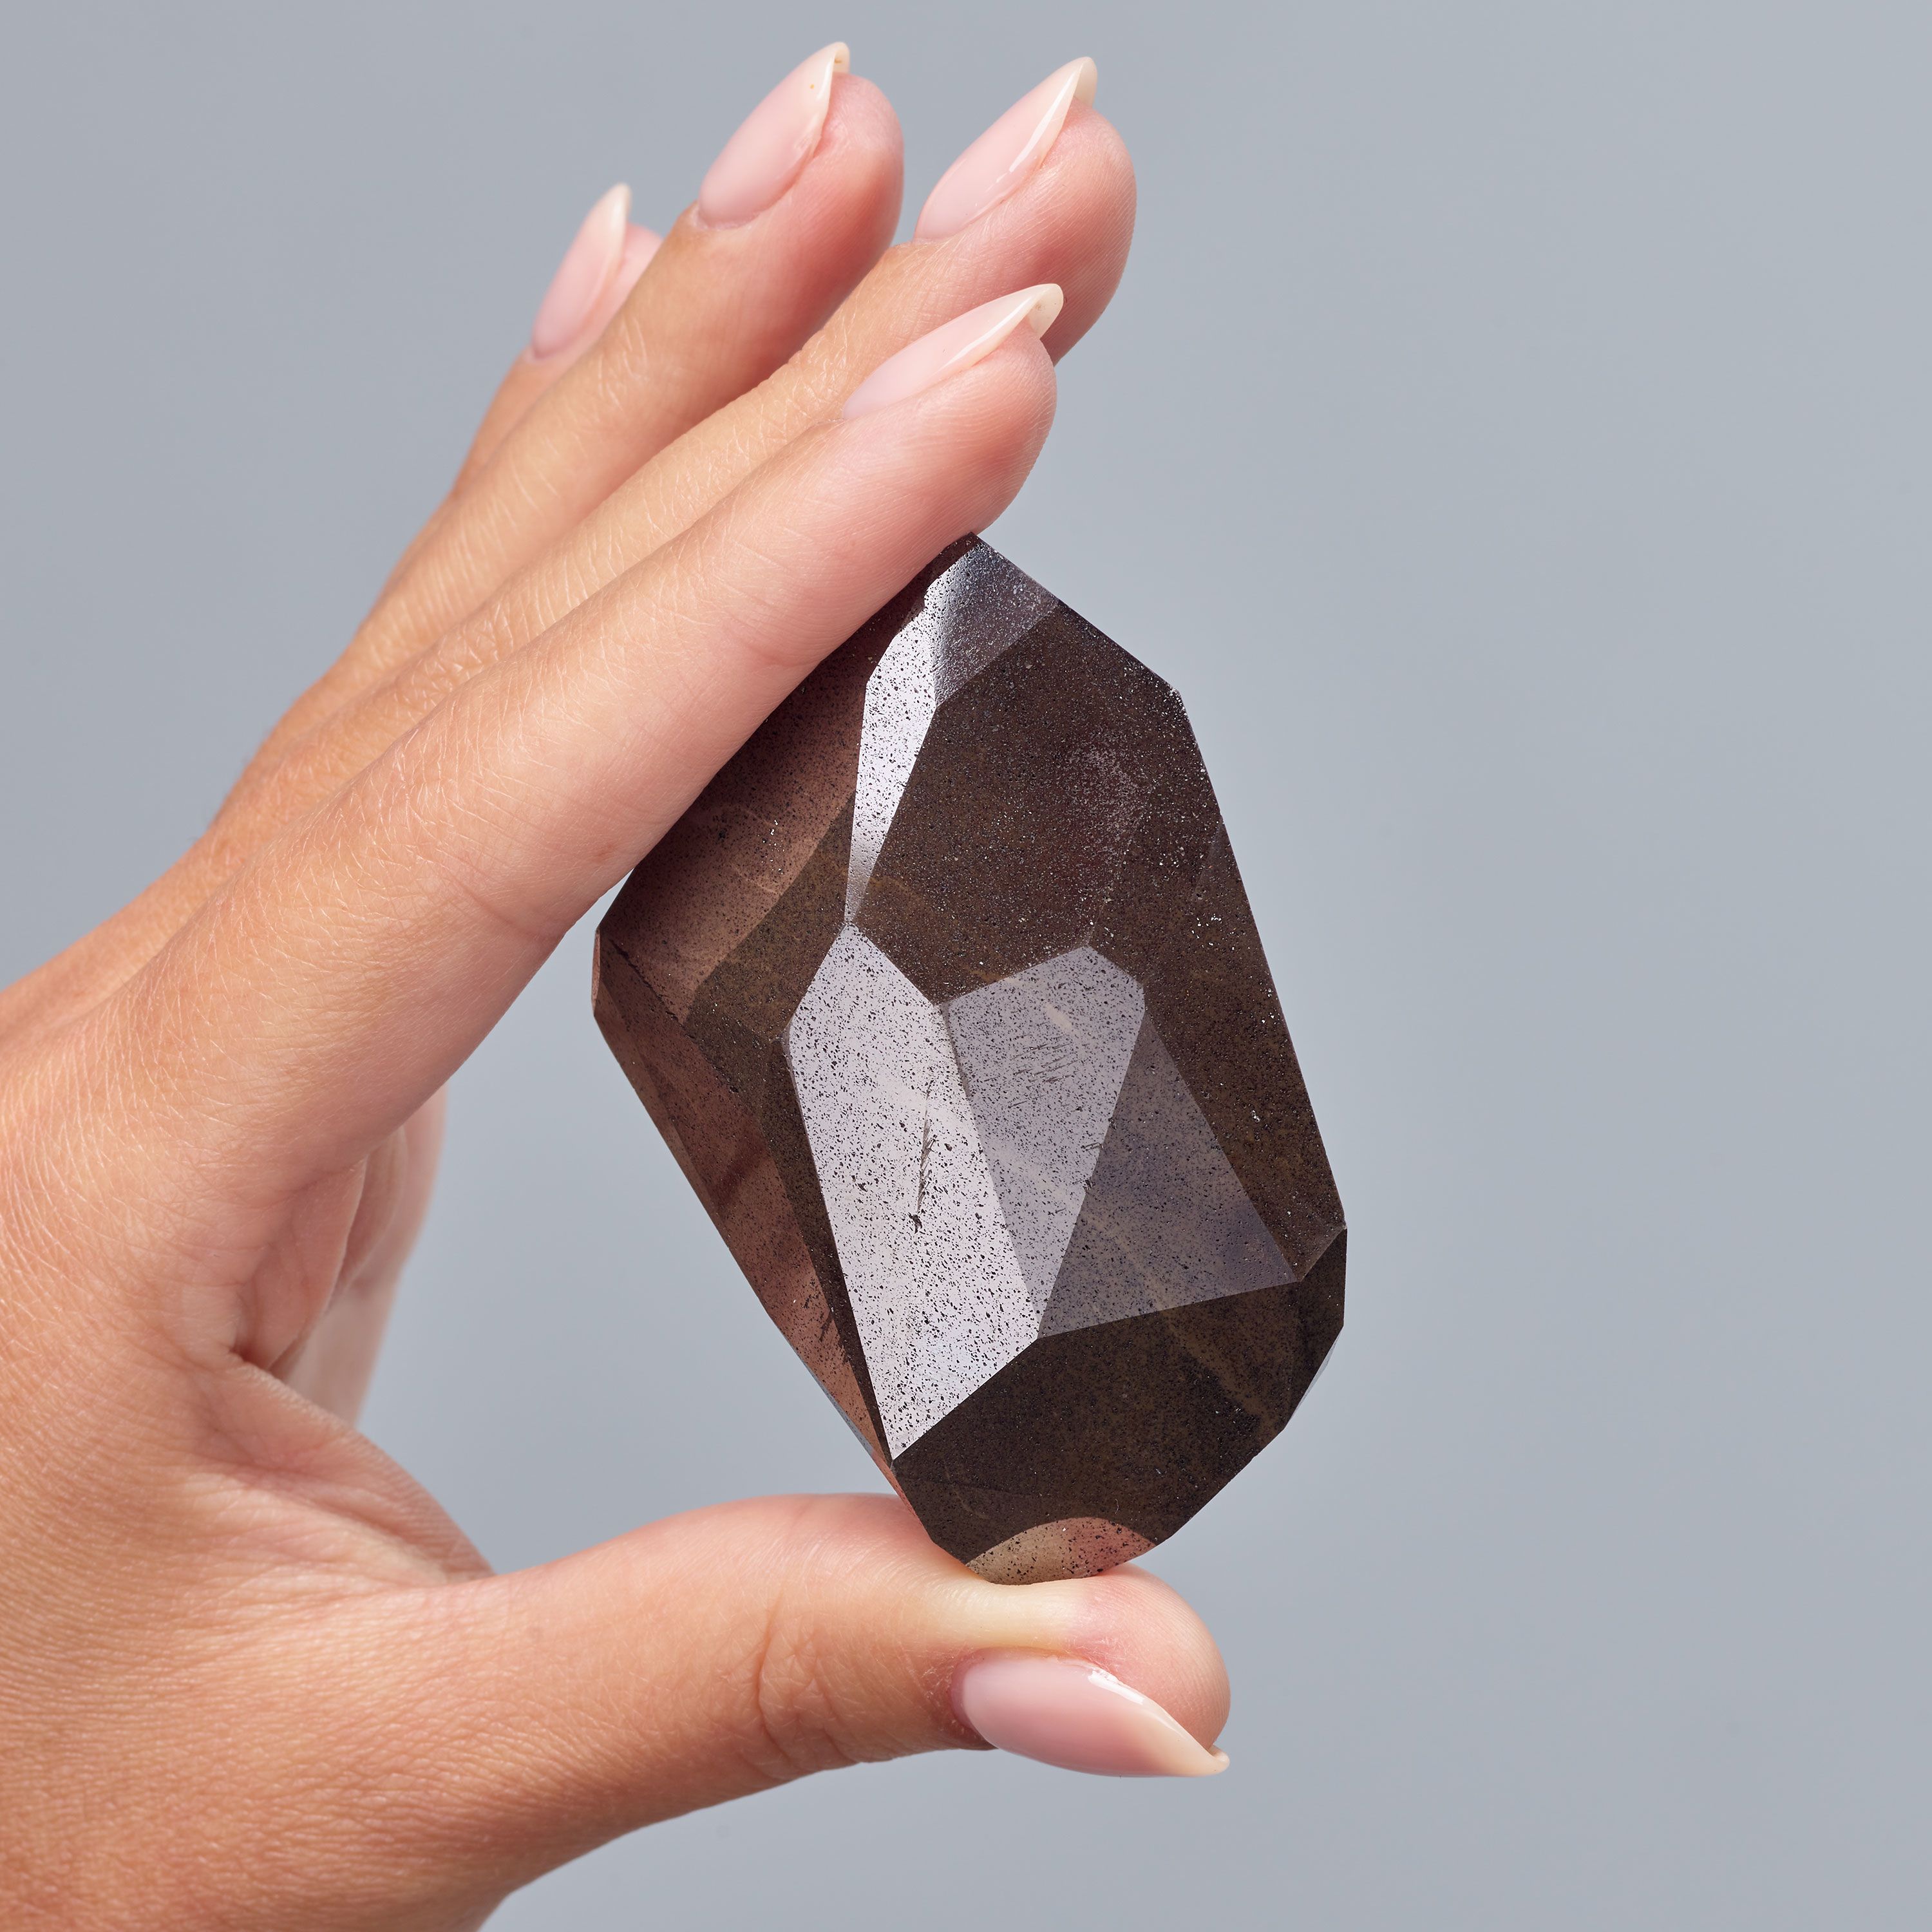 Black diamond : a price equal to the mystery of its origin